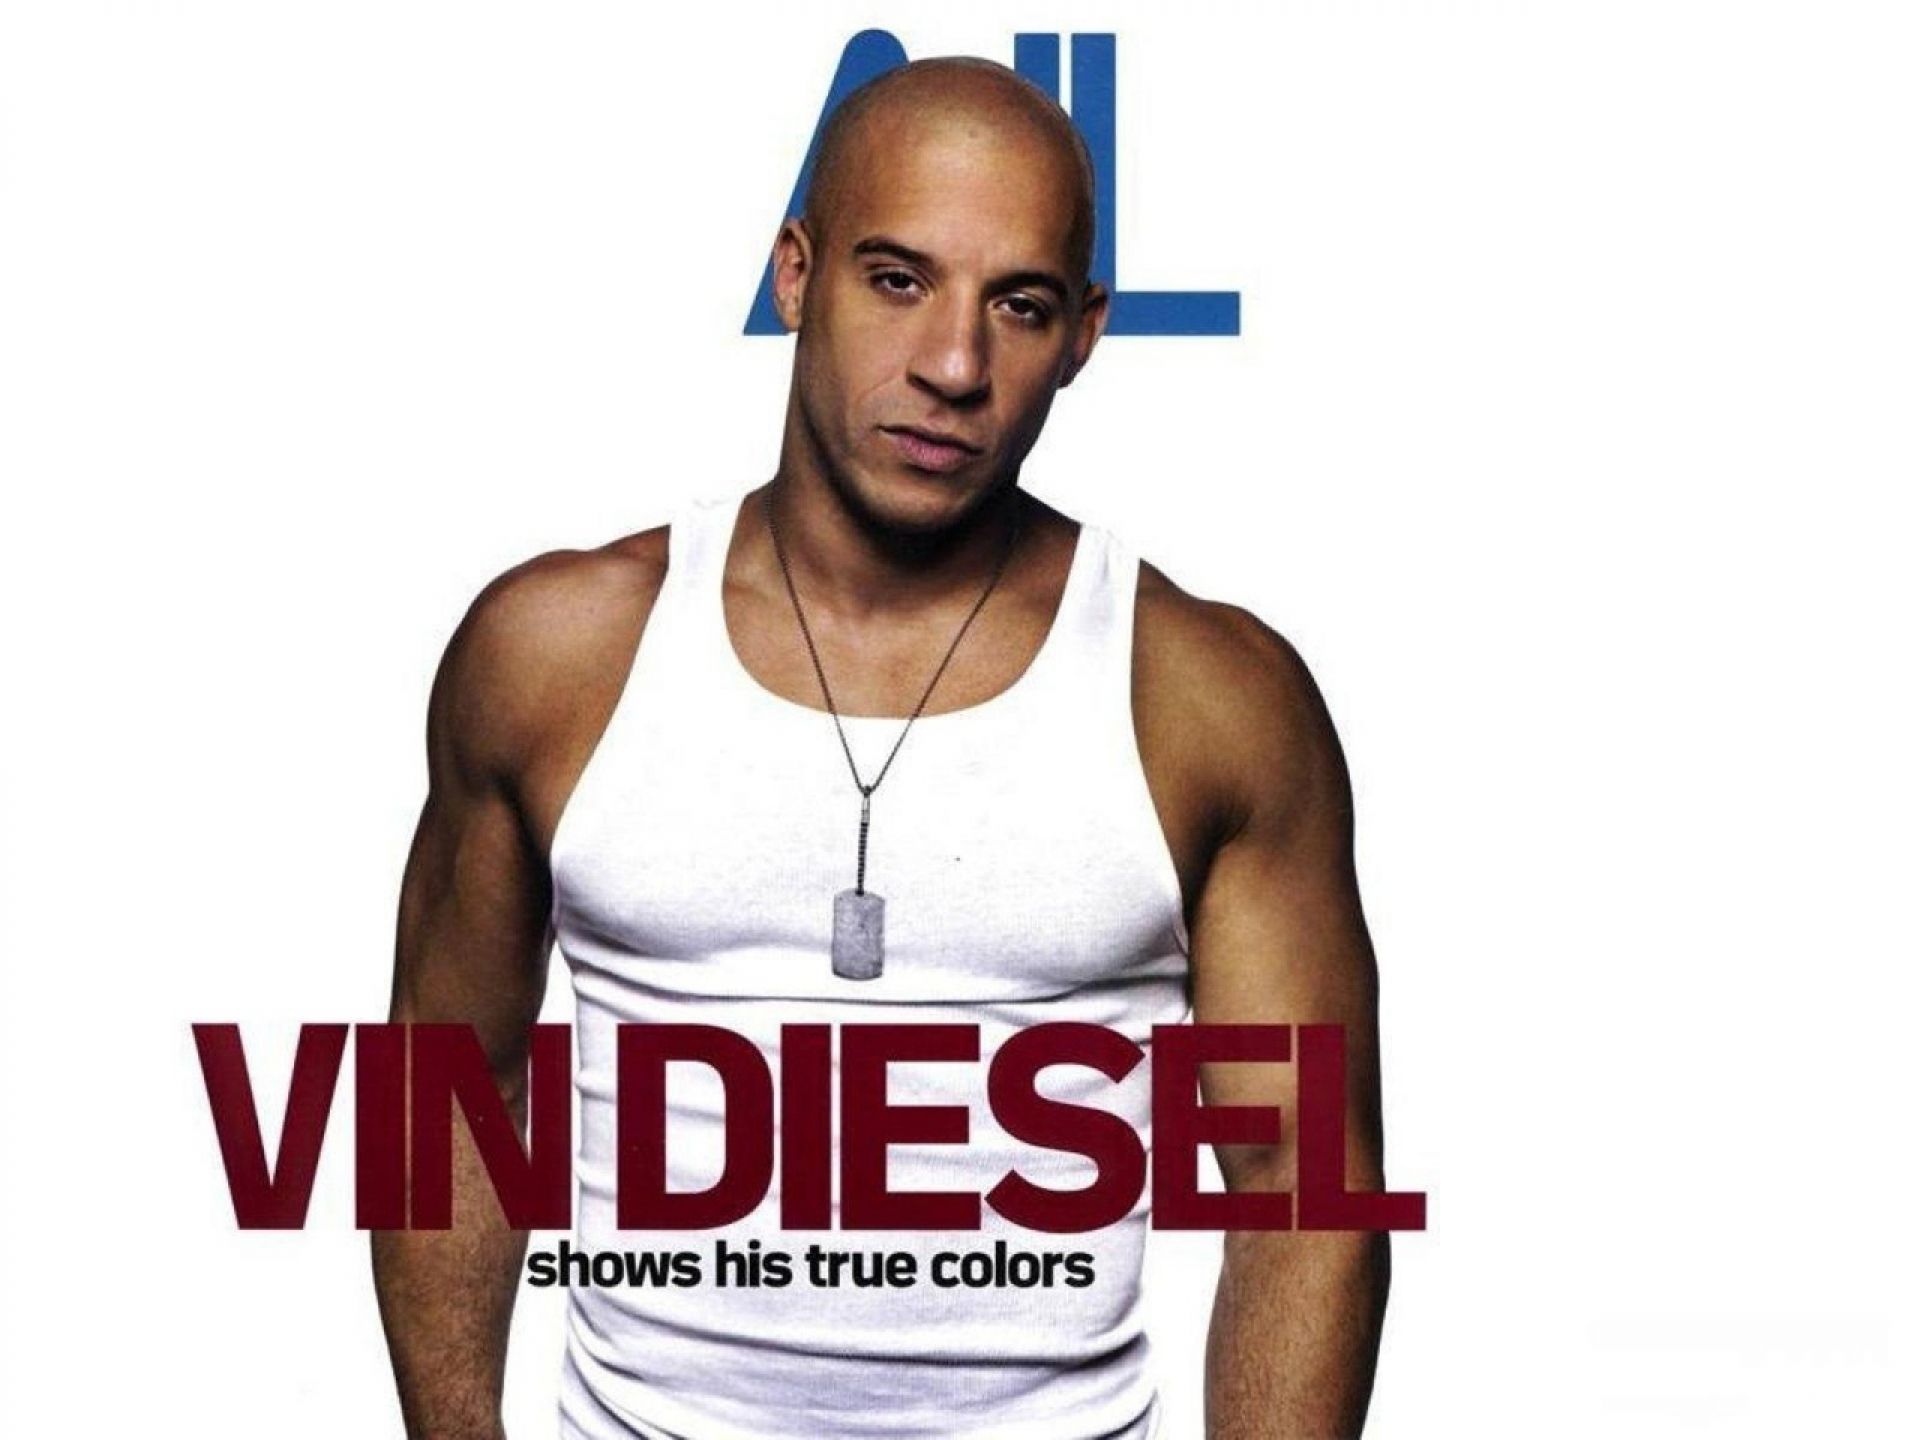 Vin Diesel shows his true colors wallpapers and images